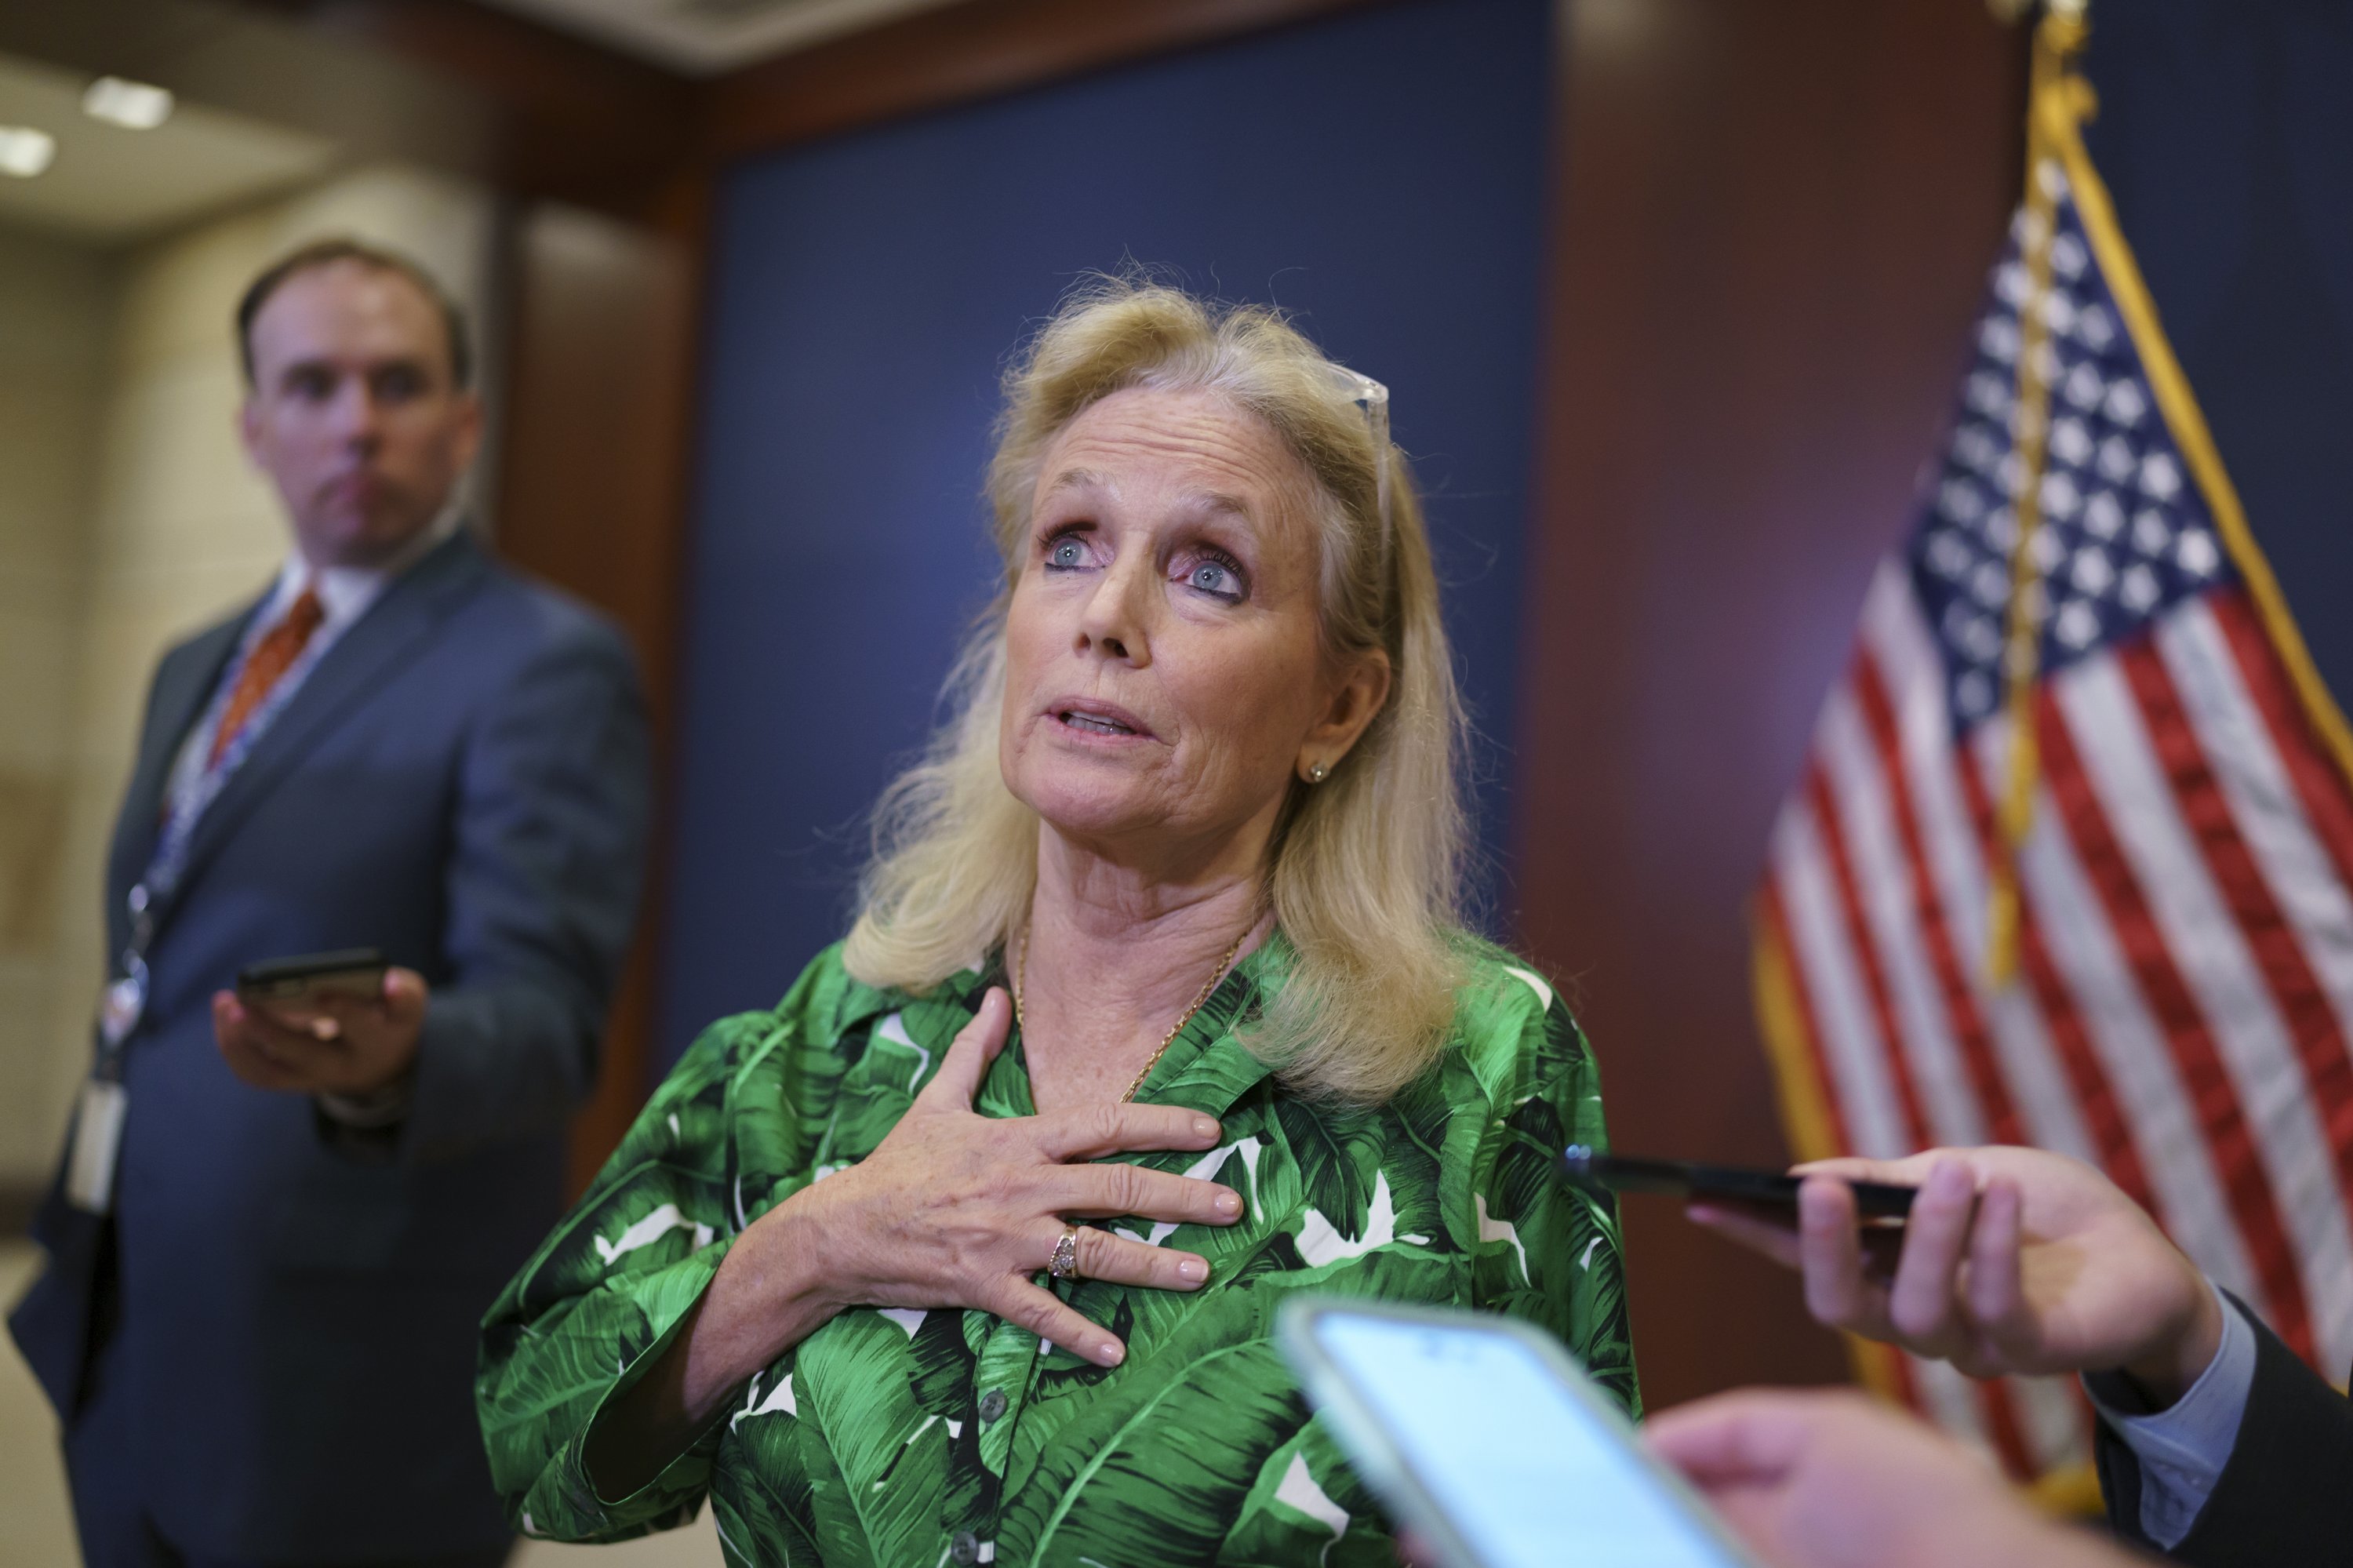 Democratic representative of Michigan, Debbie Dingell, pauses for reporters after a meeting of the House Democratic Caucus, at the Capitol in Washington, D.C., U.S., June 15, 2021. (AP Photo)